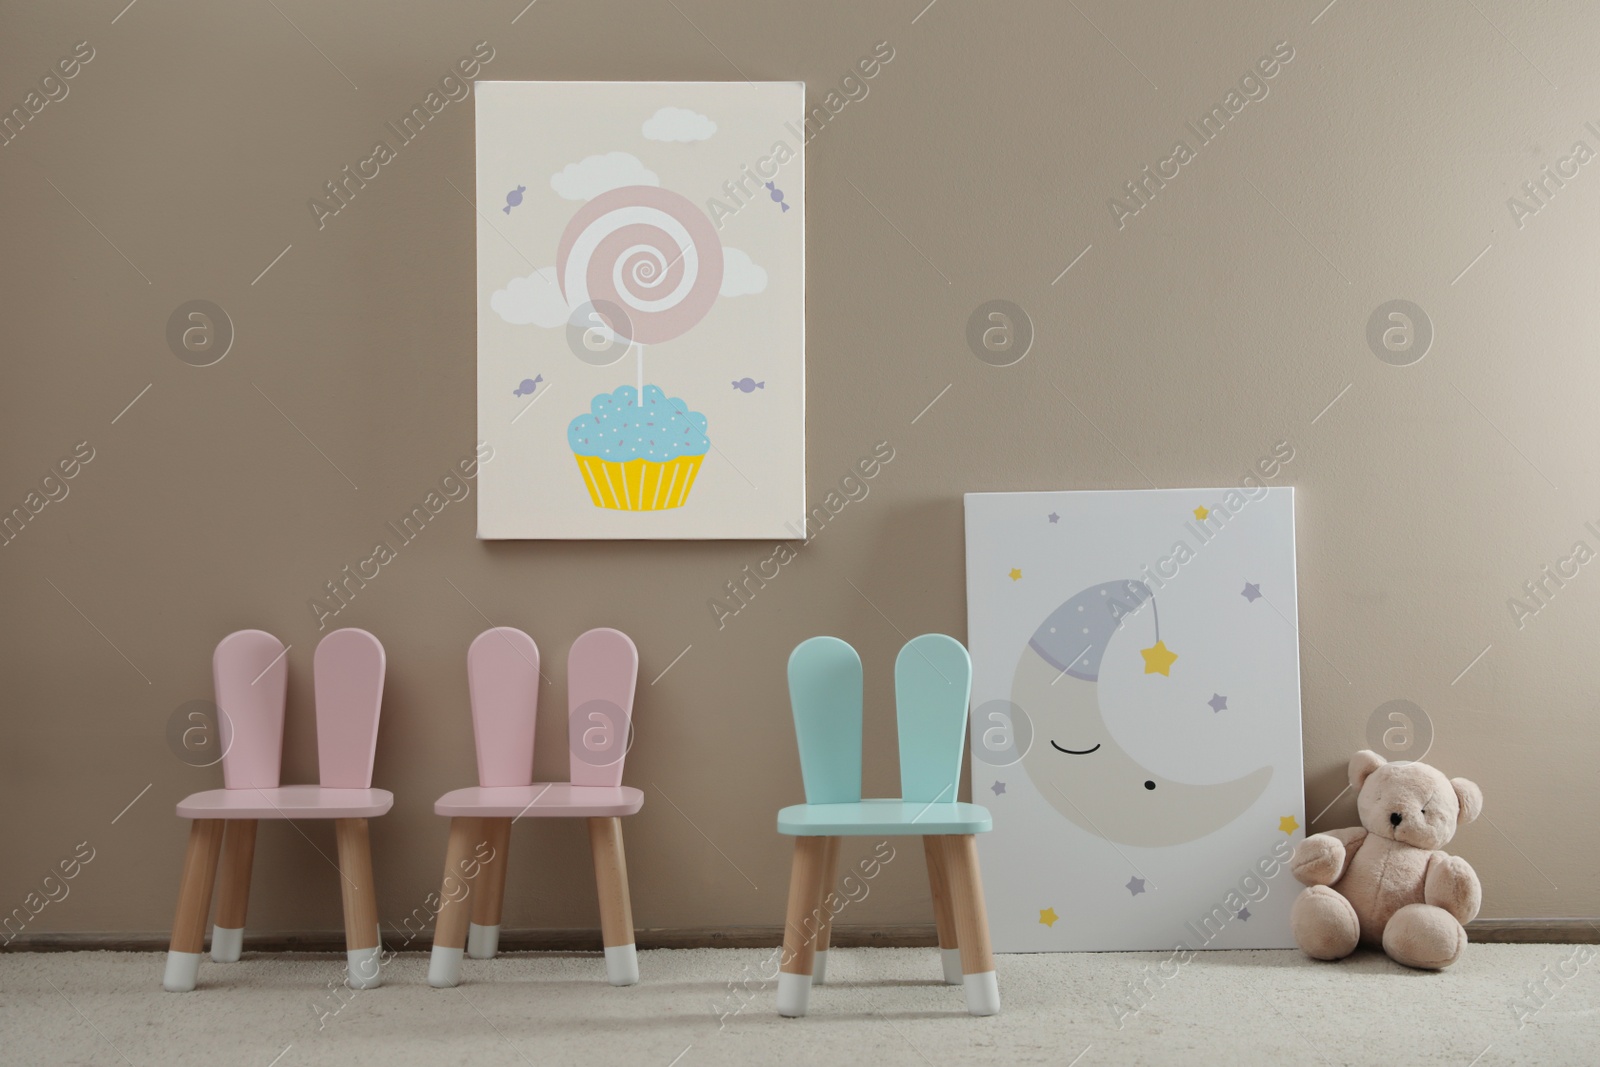 Photo of Cute chairs with bunny ears in children's room interior